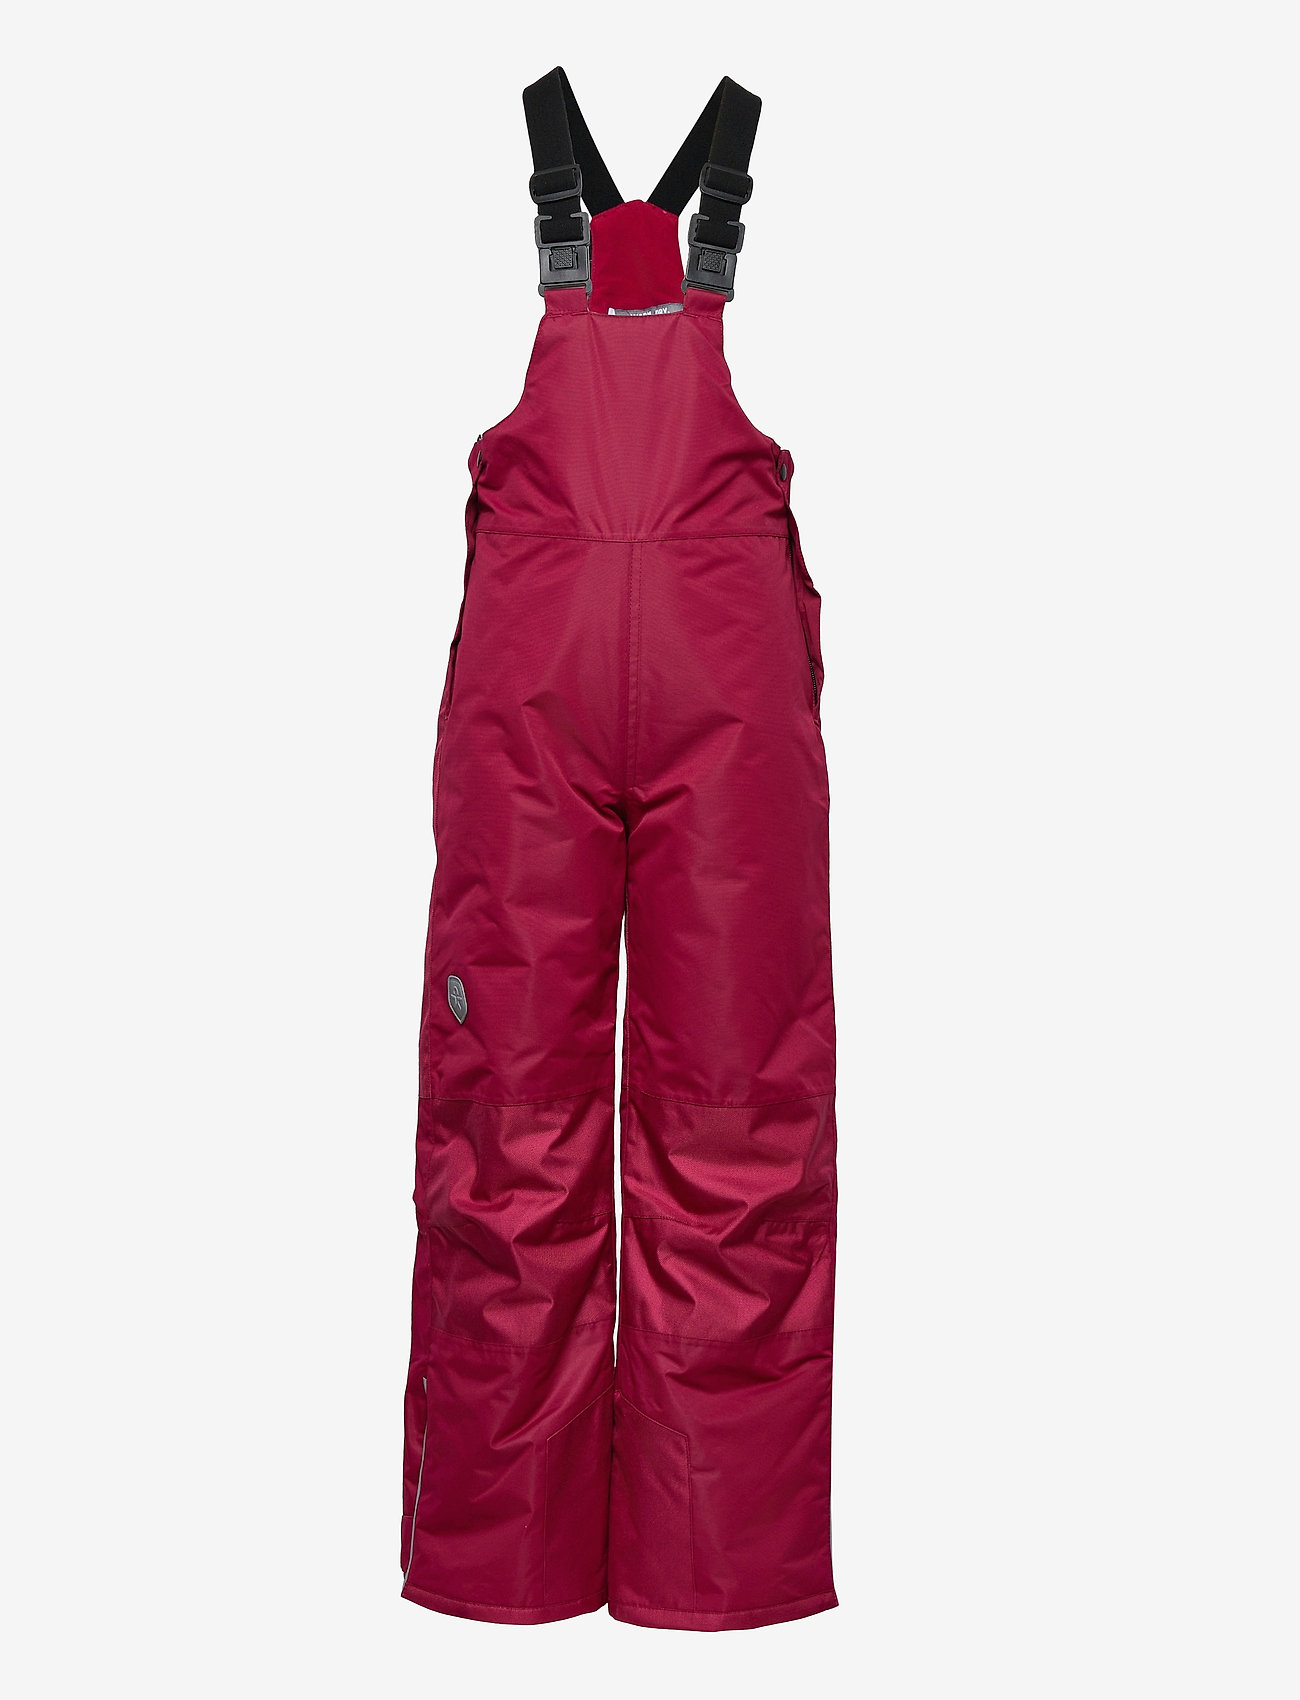 Color Kids - Winter pants, AF 10.000 - winter trousers - beet red - 0